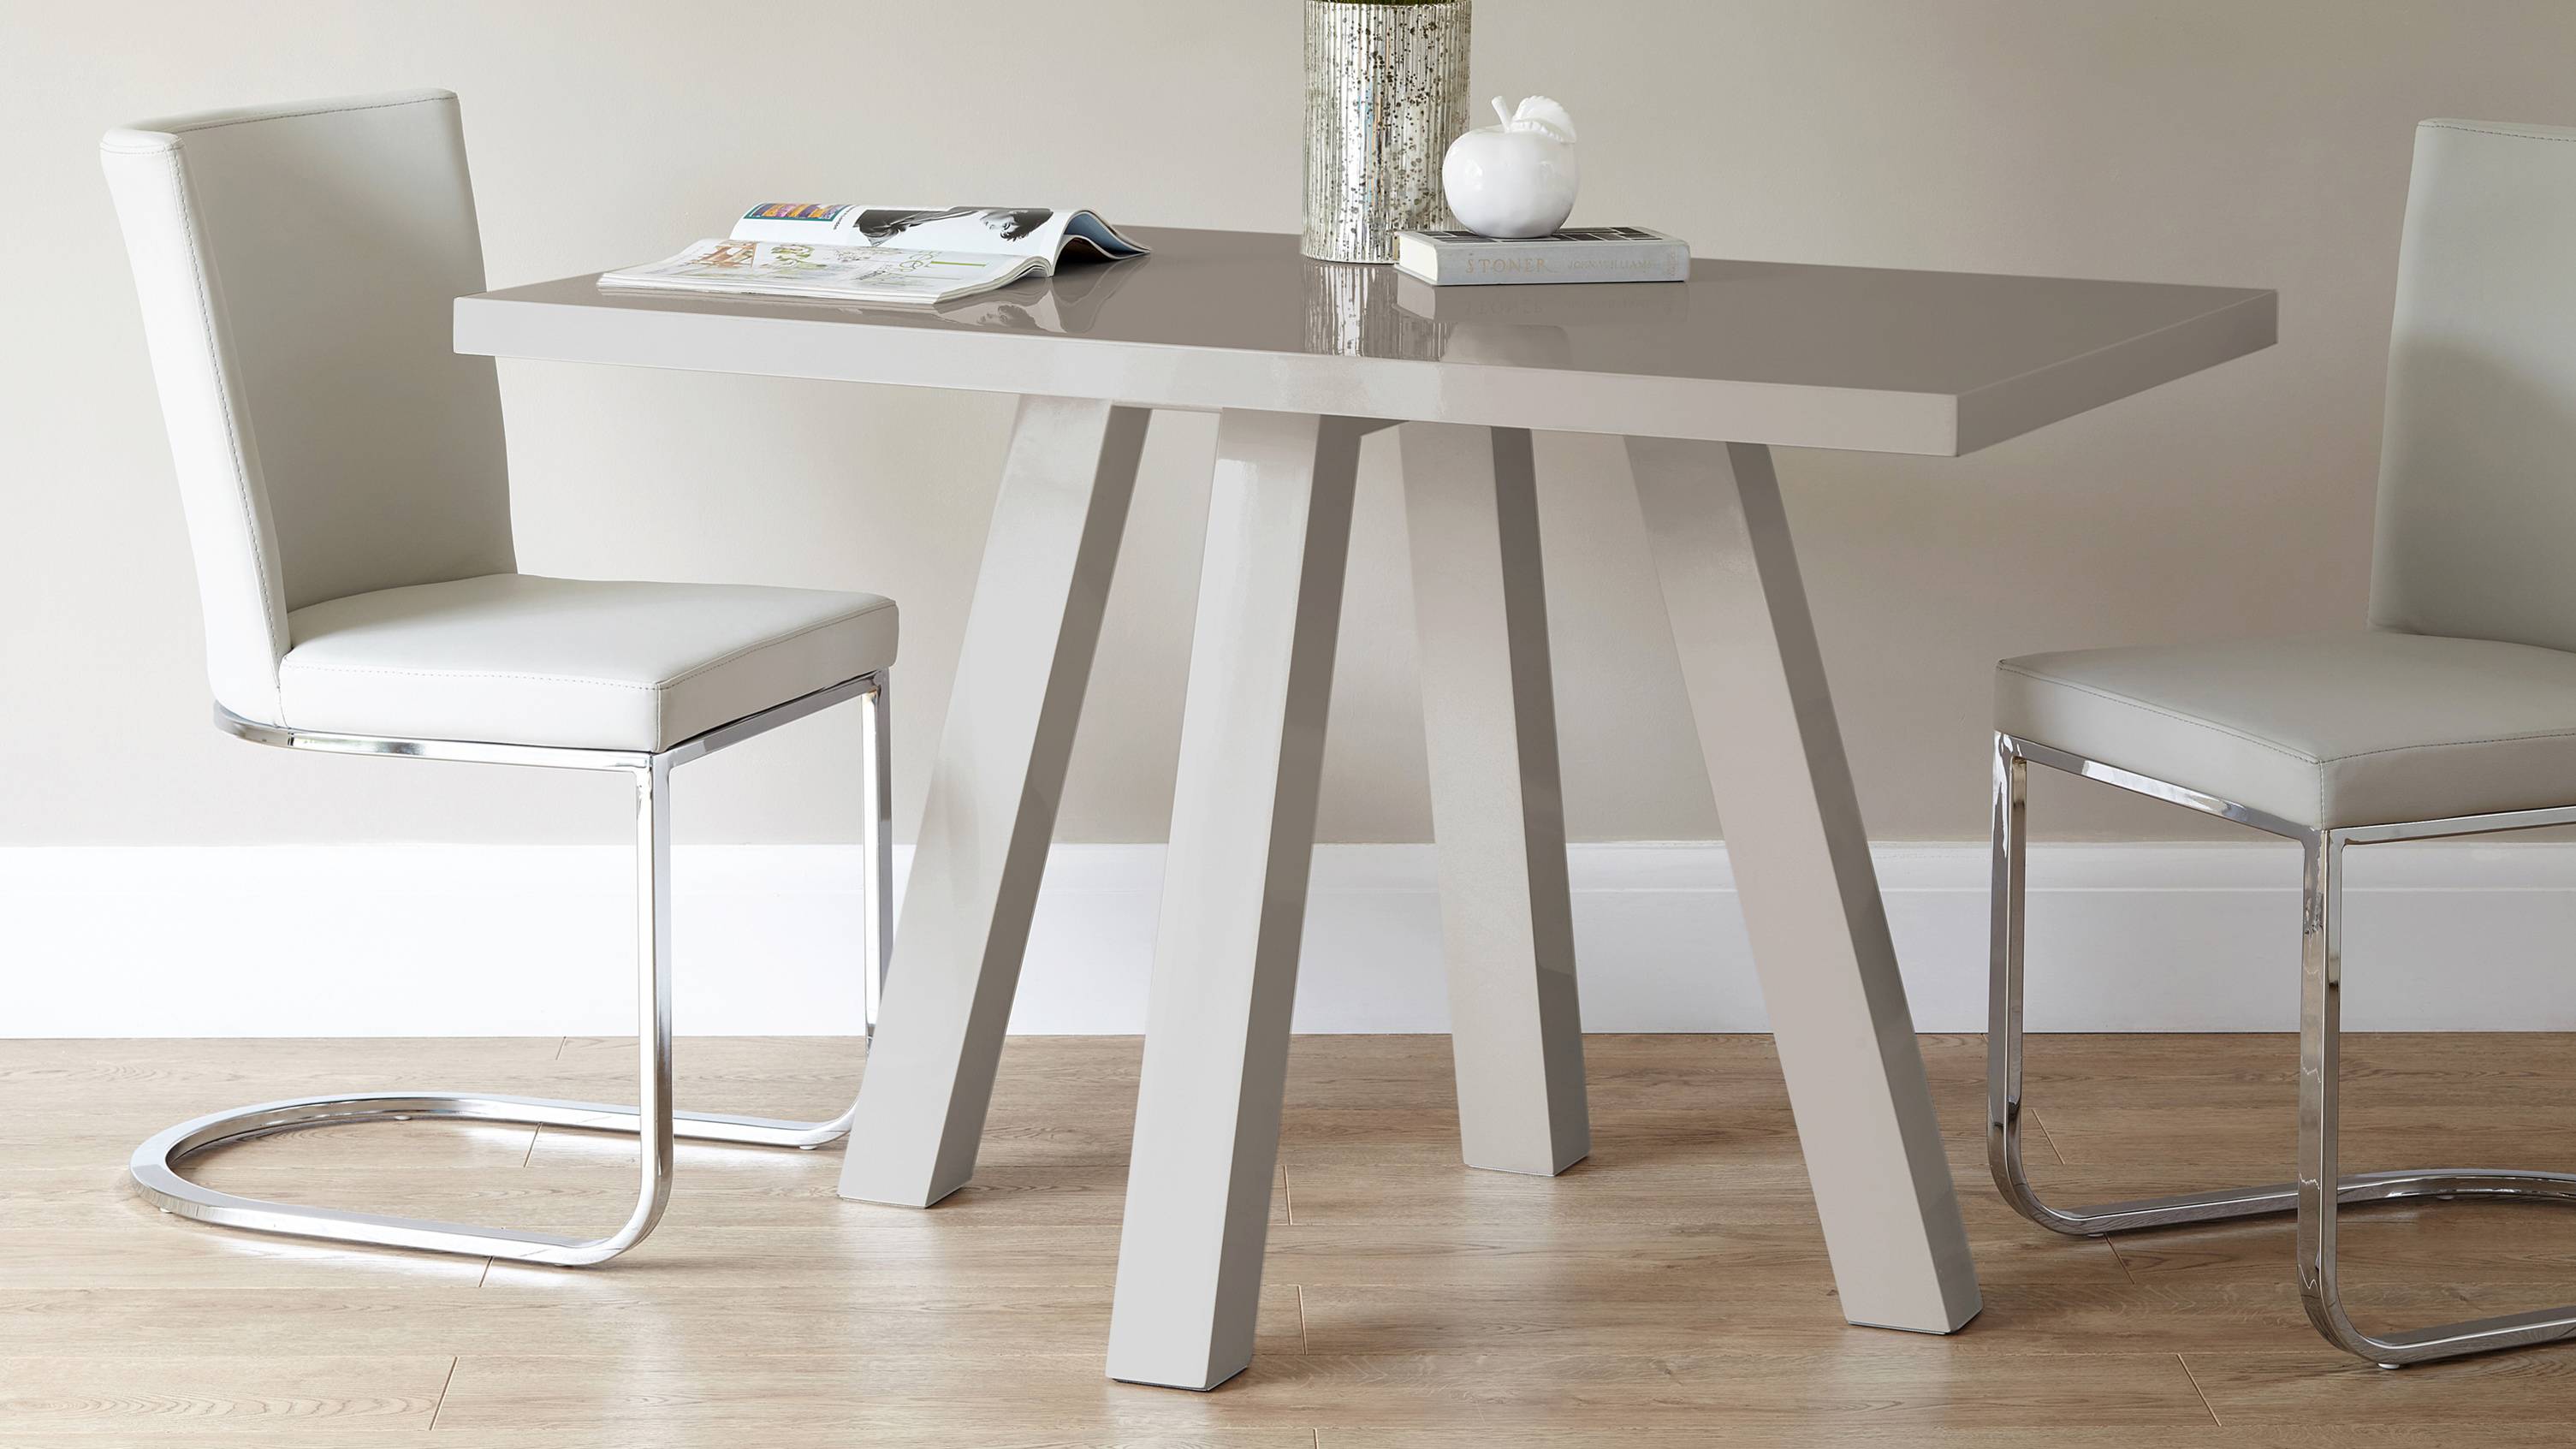 Exclusively Danetti with Julia Kendell grey gloss dining table